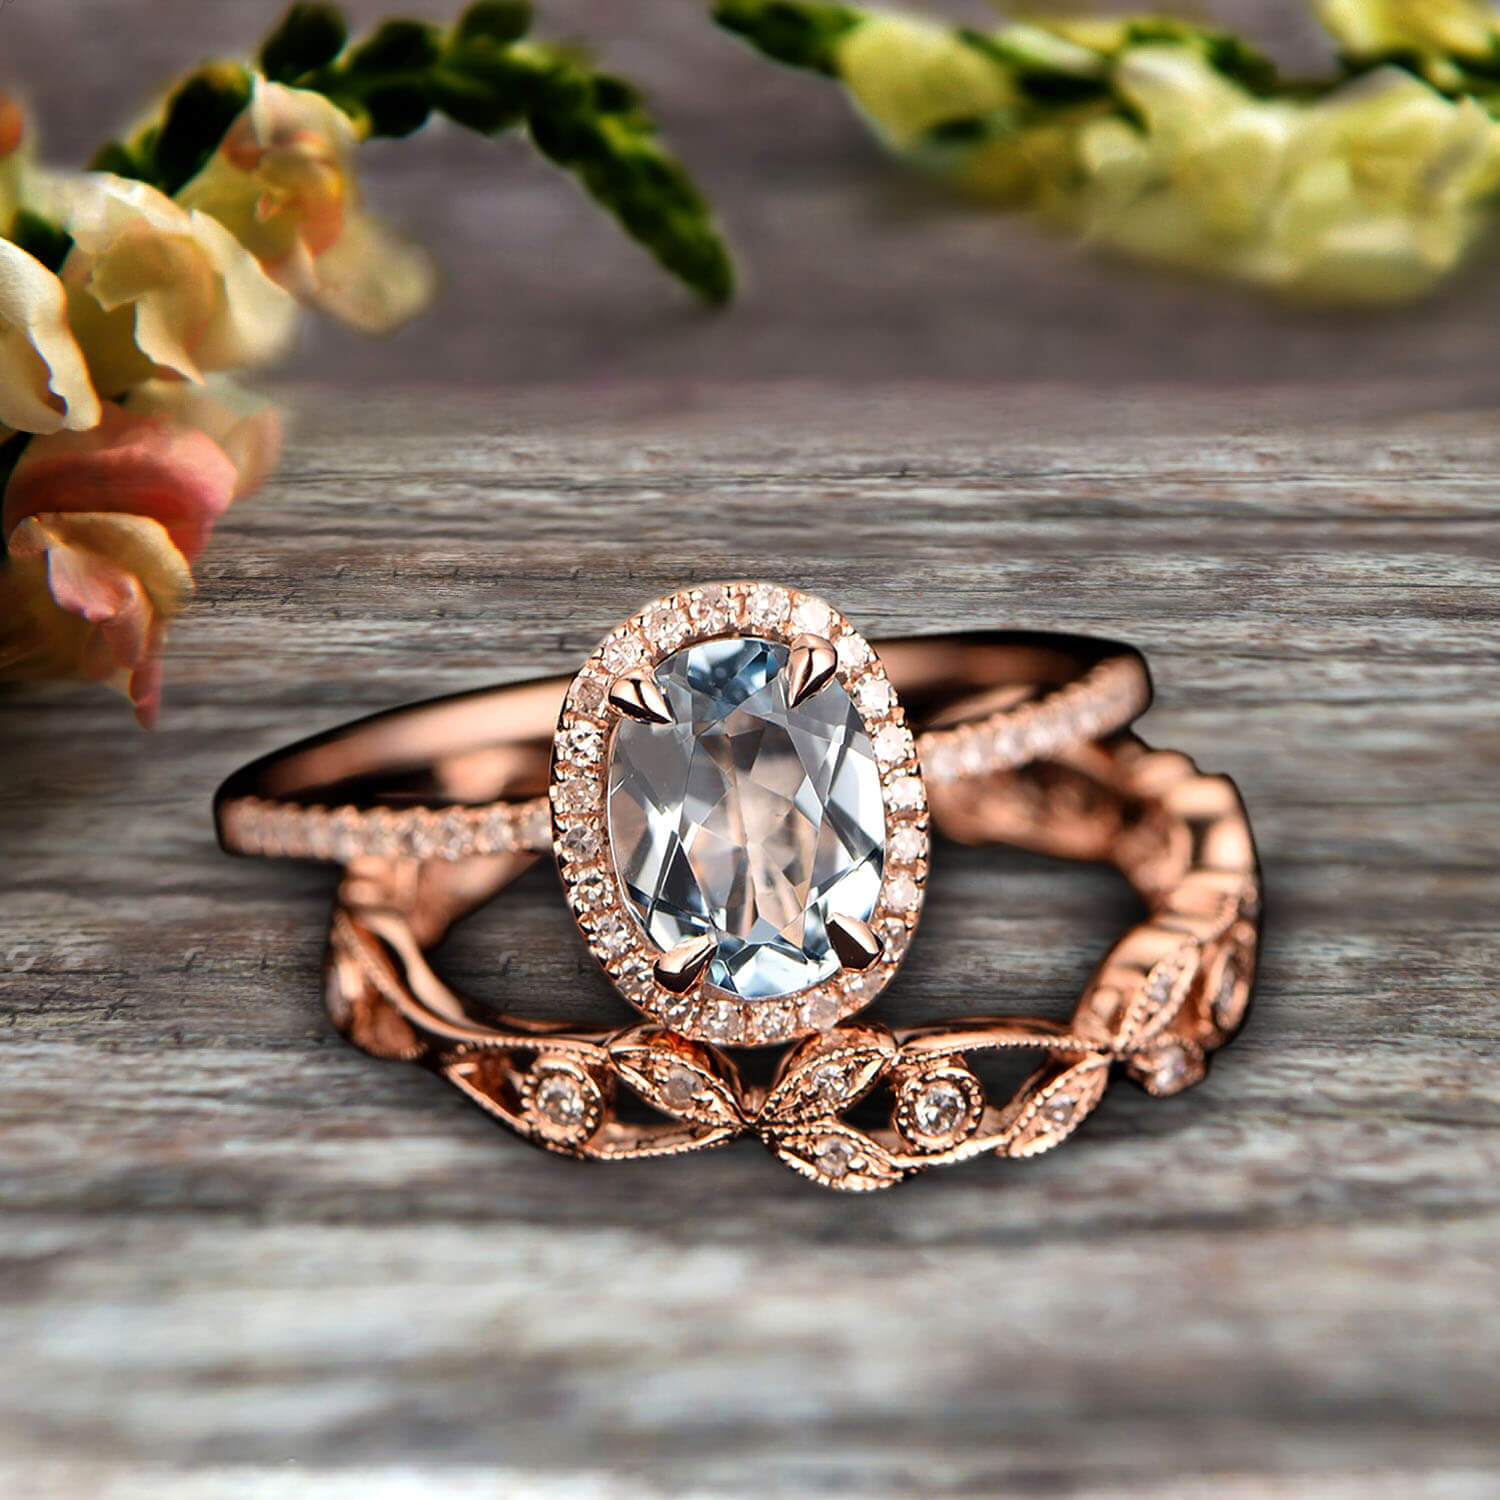 Solid gold mens band Diamond wedding band Art deco Round band 14K 18K rose  gold Vintage Bridal ring unique Promise ring Anniversary ring